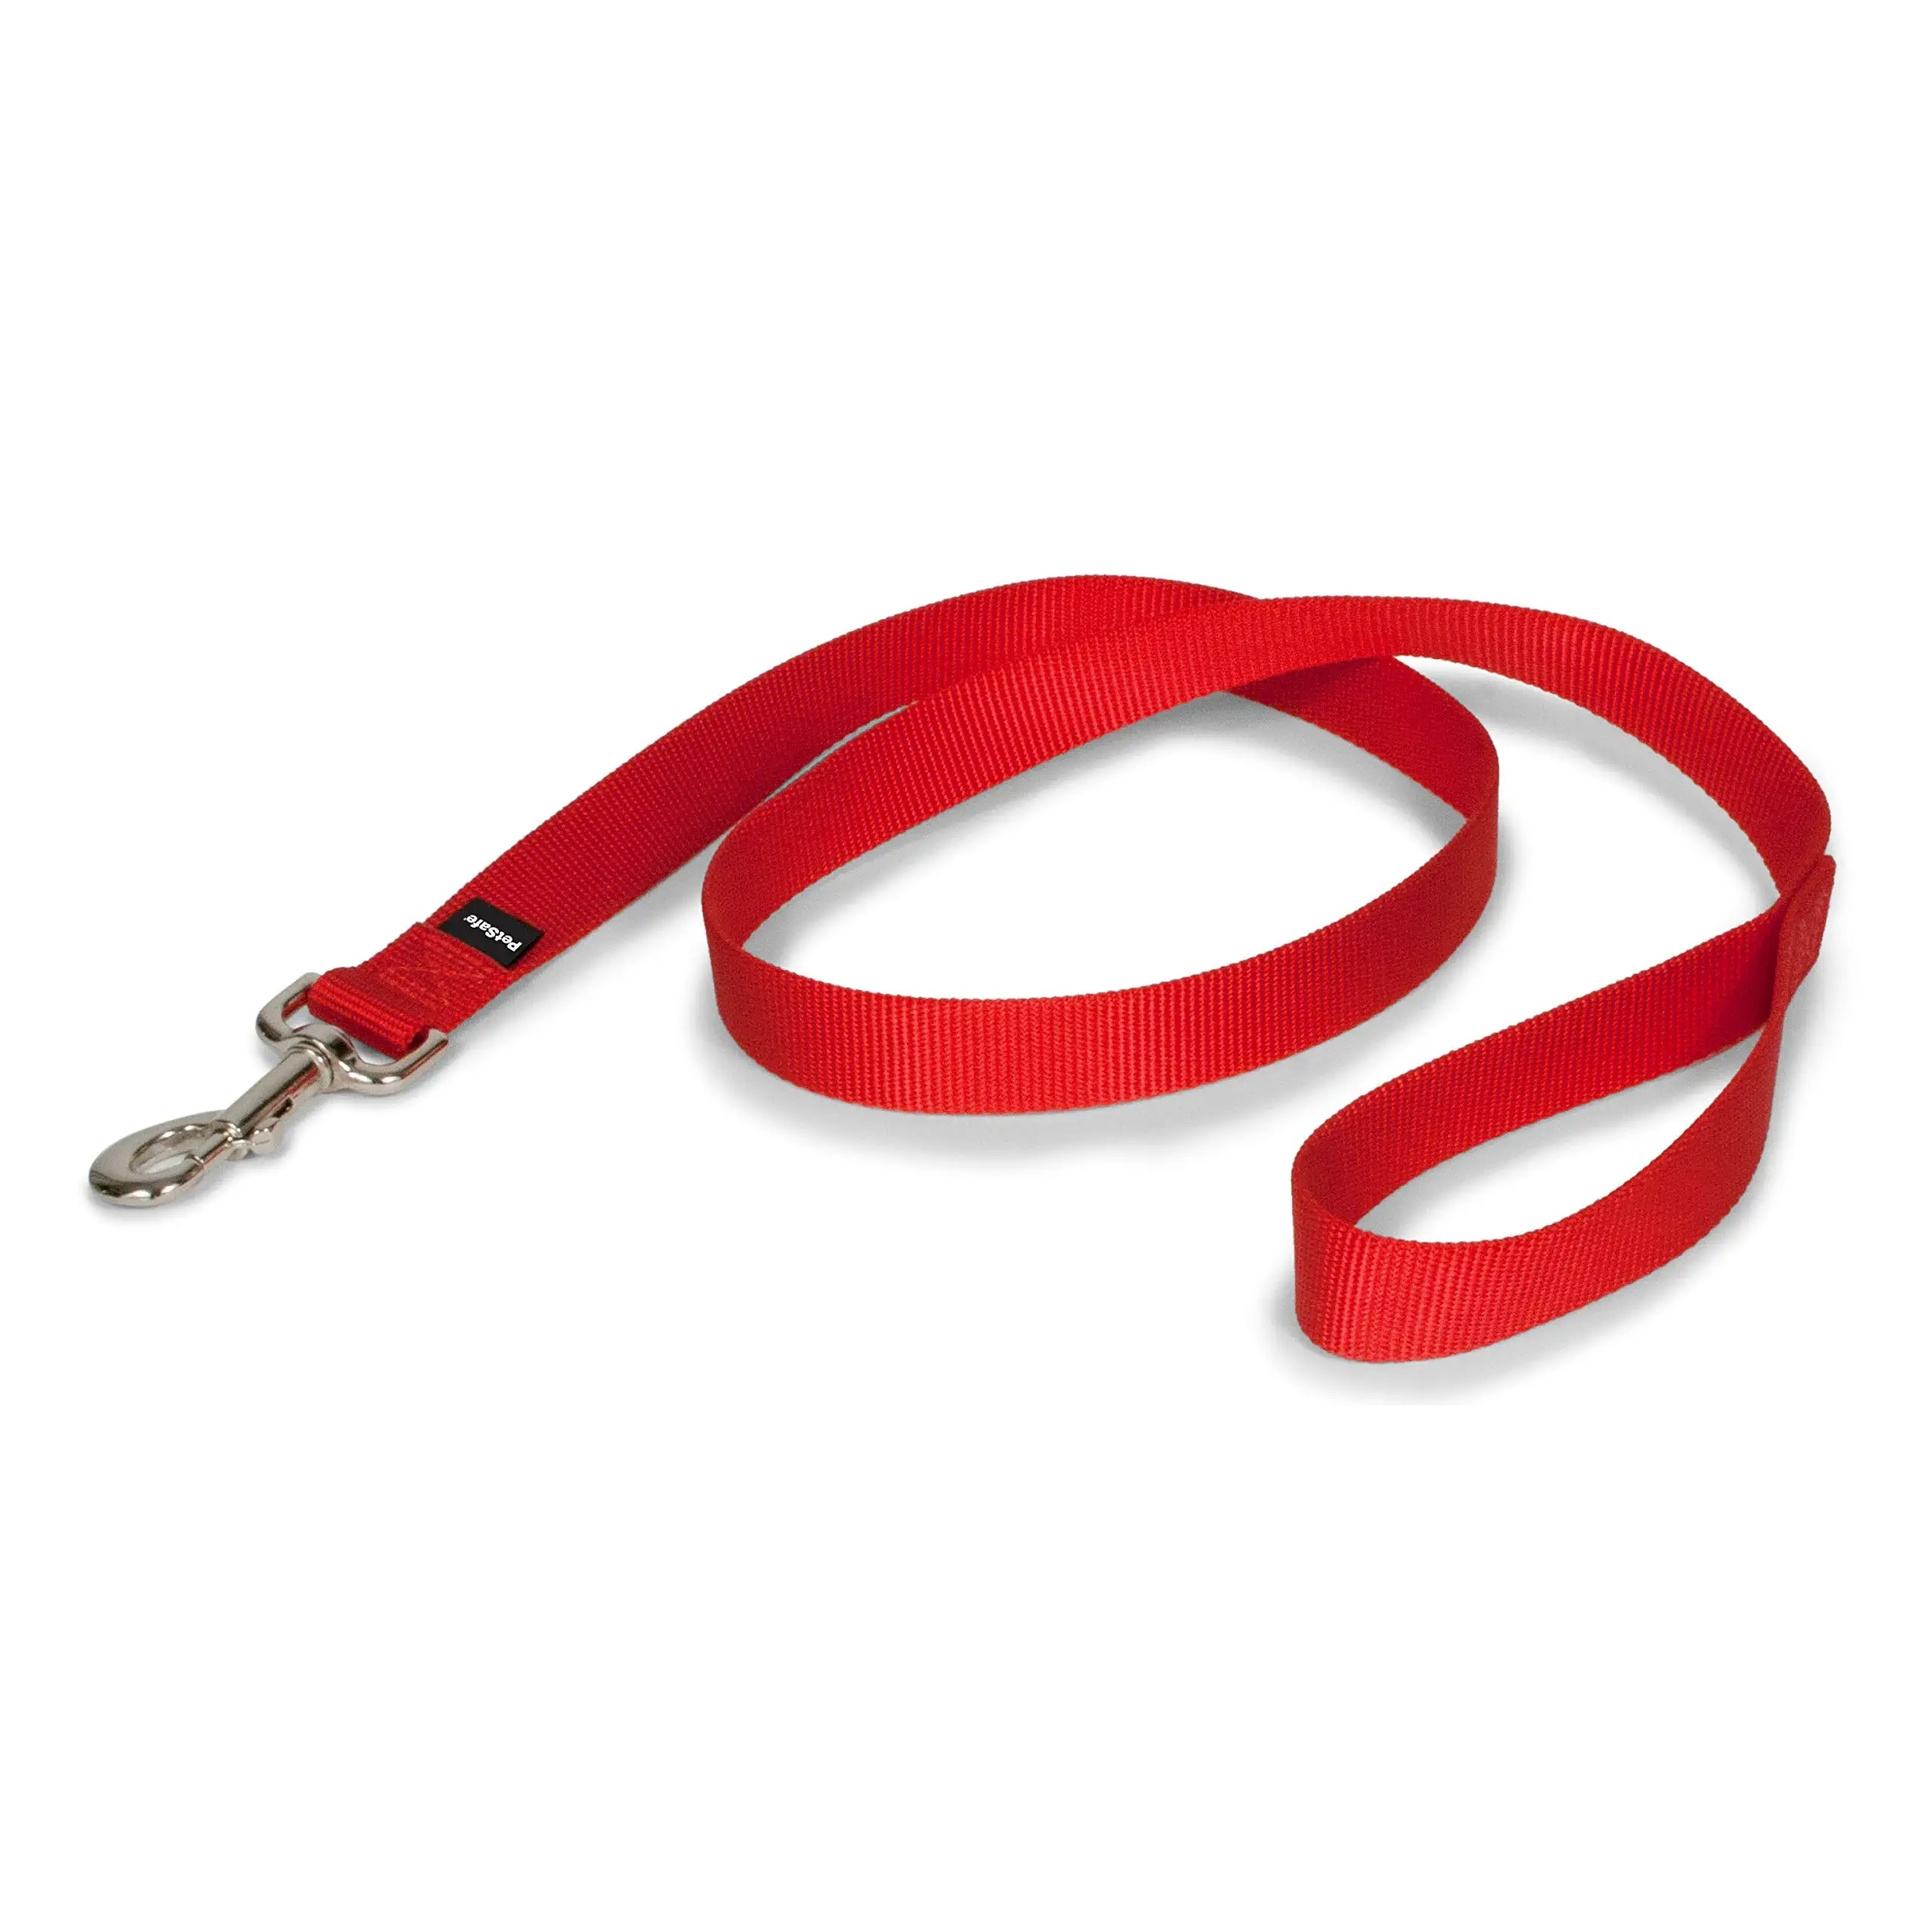  Nylon Dog Leash - Strong, Durable, Traditional Style Leash 